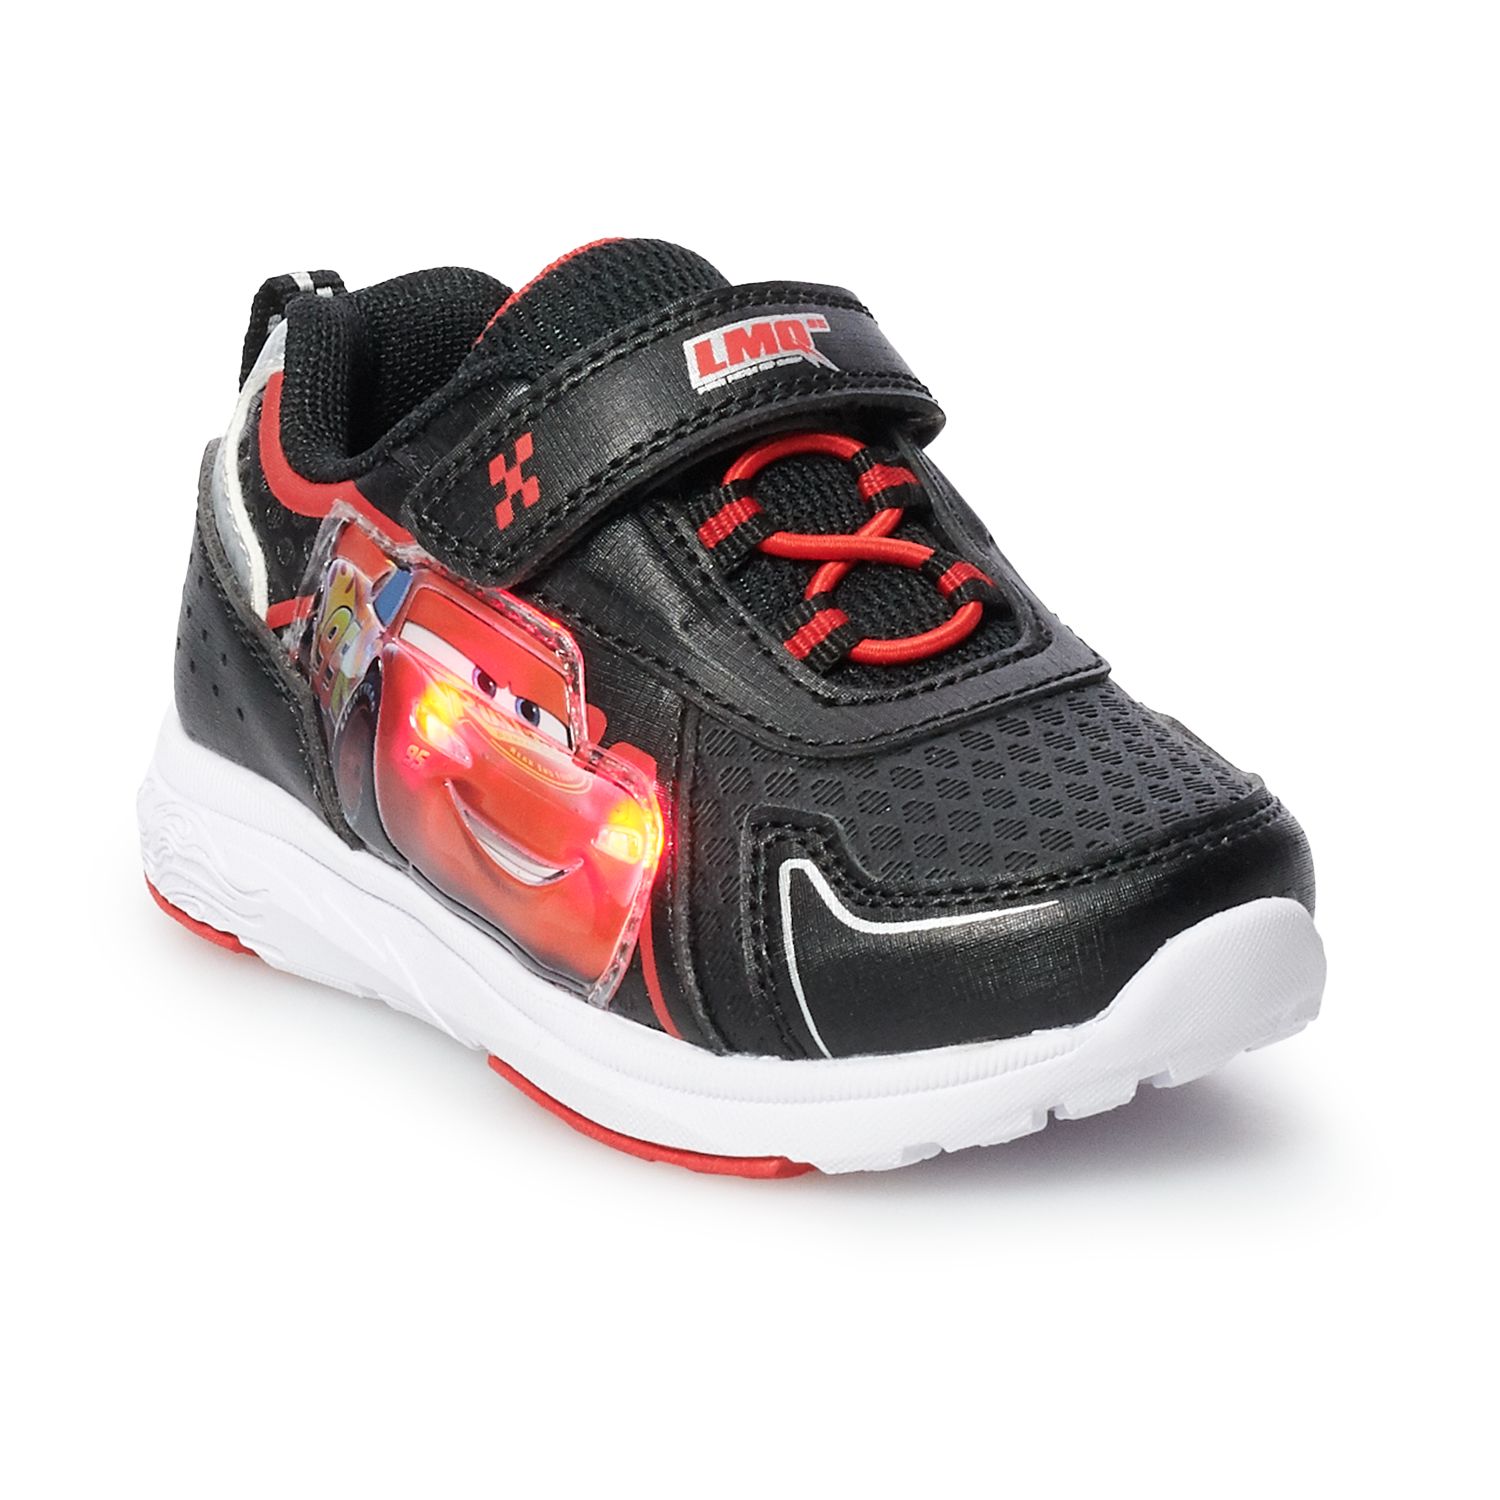 disney cars shoes for toddlers